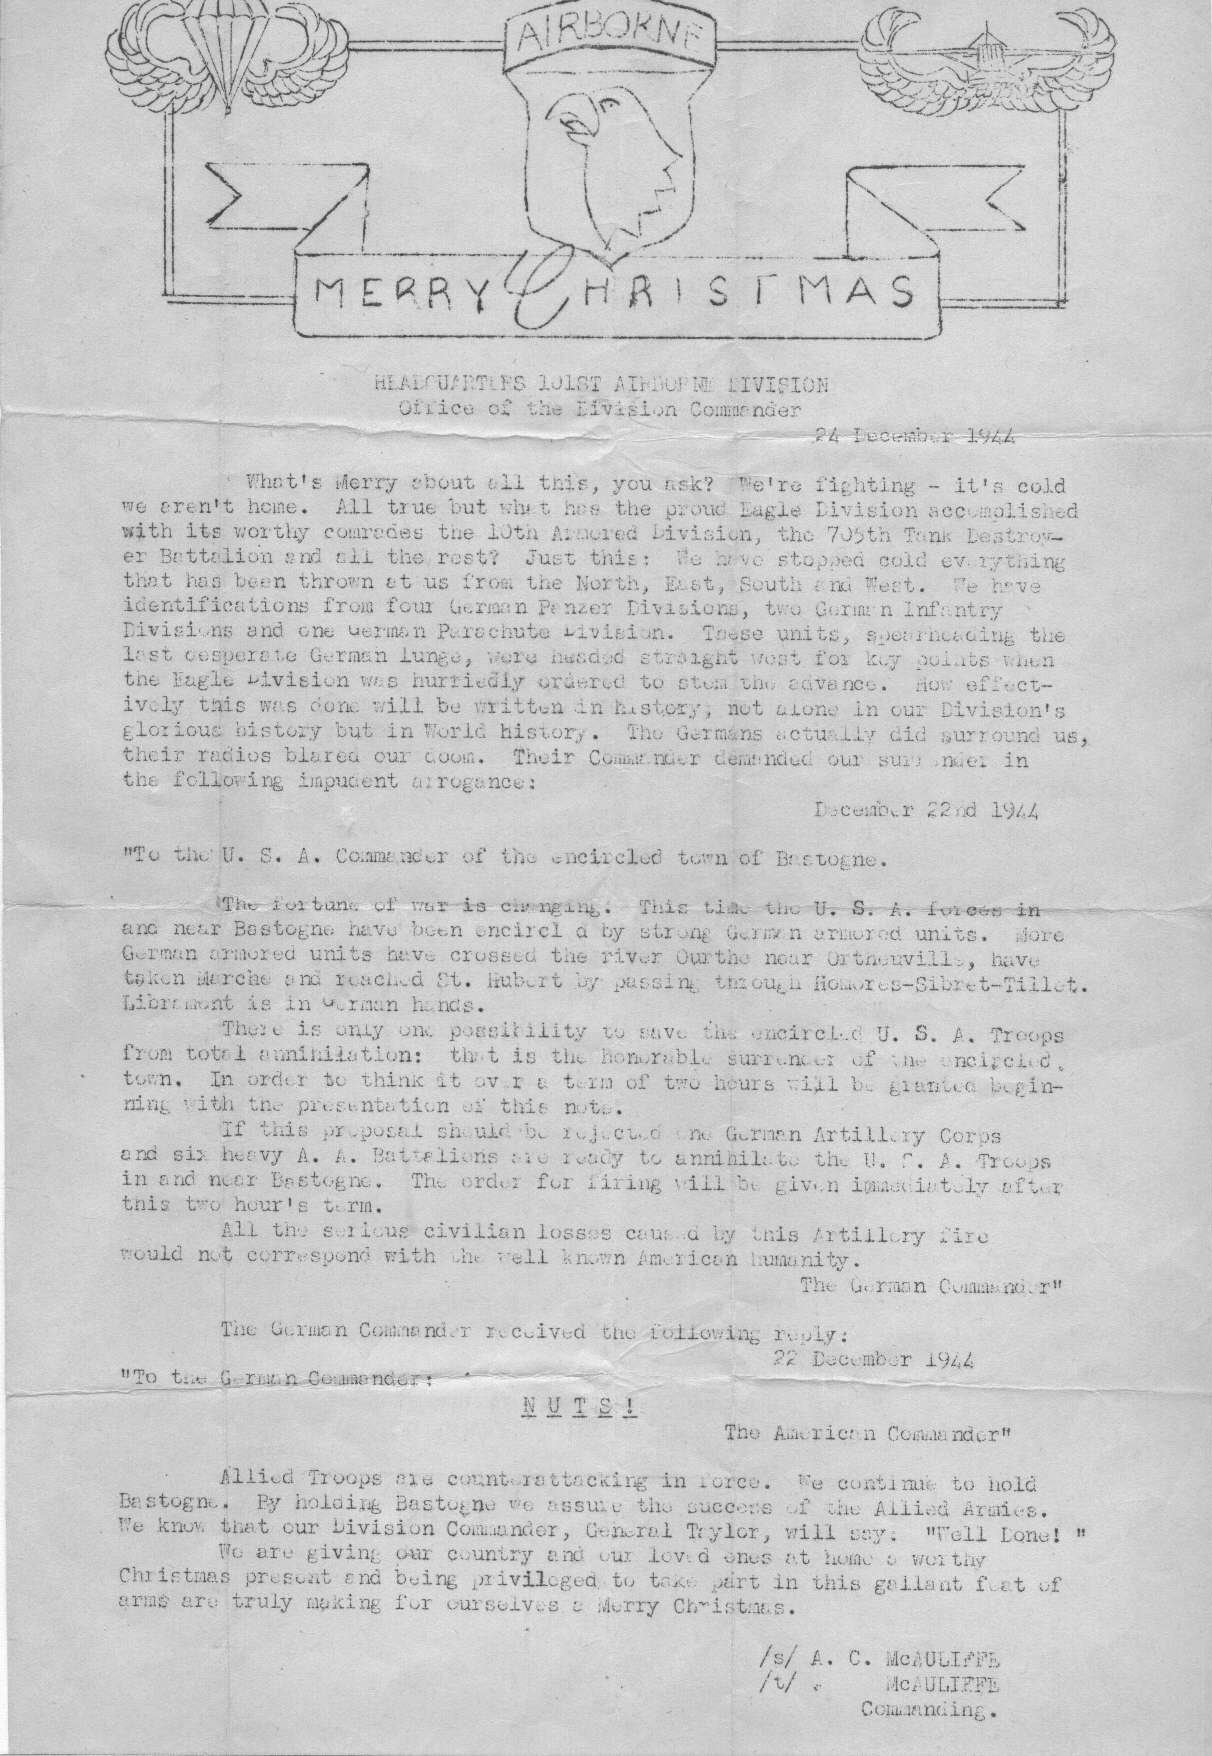 Brigadier General Anthony McAuliffe's Christmas letter to the US 101st Airborne Division at Bastogne, Belgium in which he recreated the German surrender demand and his response to it